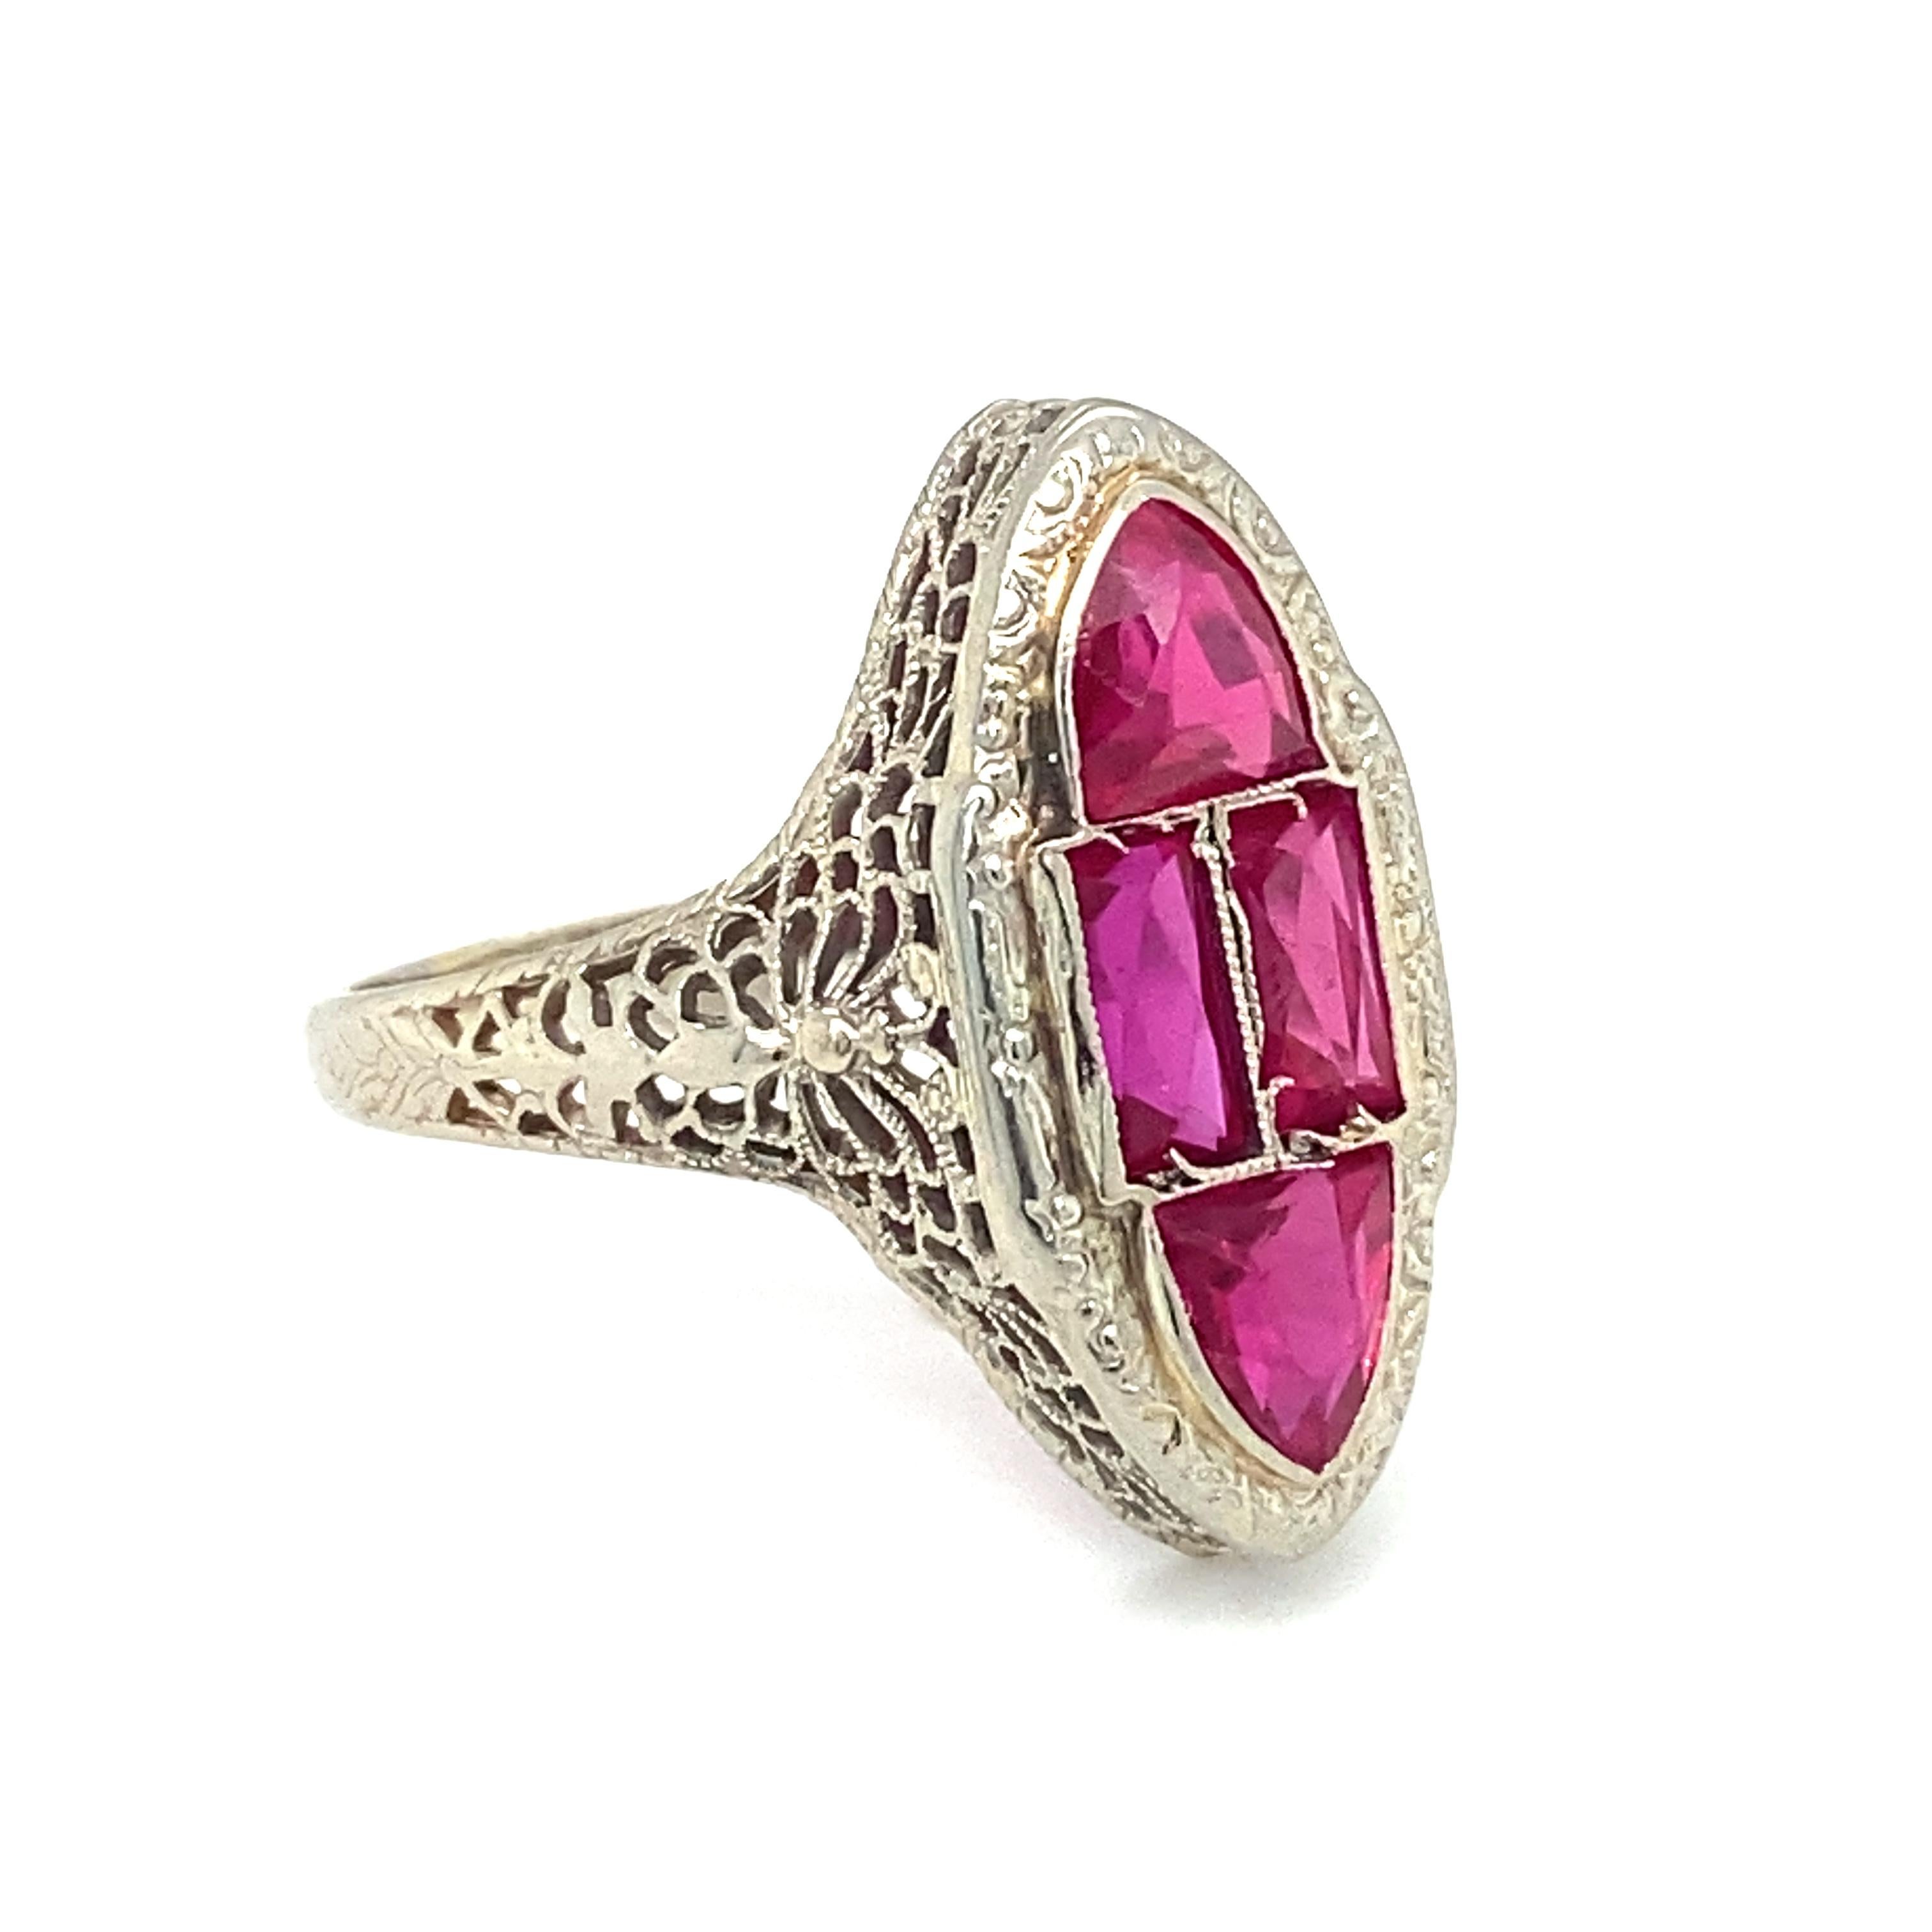 Women's or Men's Circa 1920s Art Deco Simulated Ruby Cocktail Ring in 14 Karat White Gold For Sale